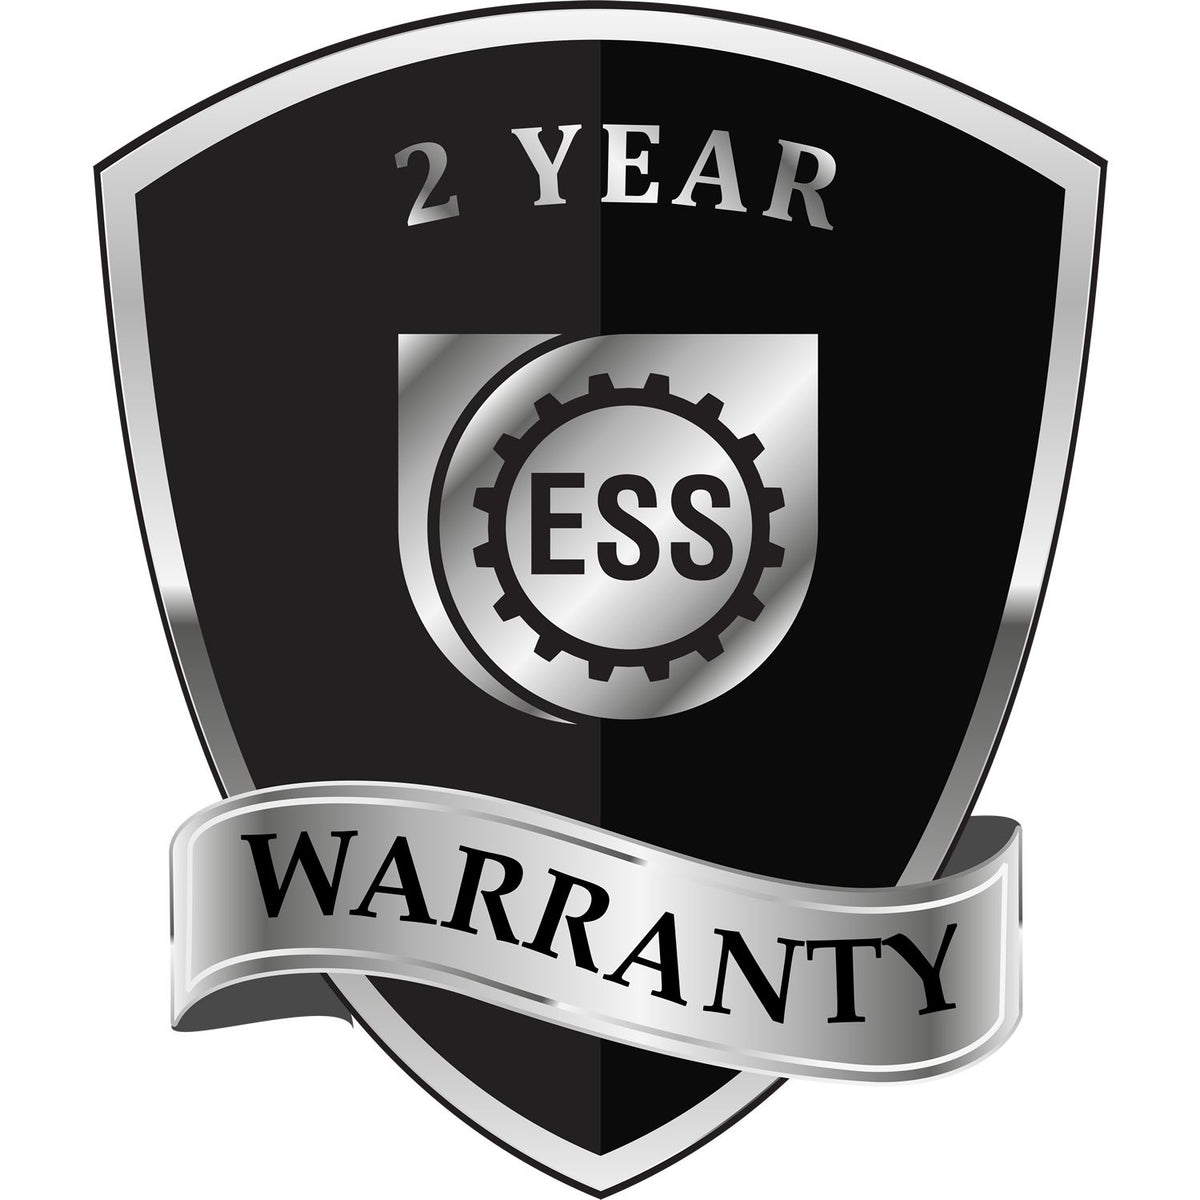 A badge or emblem showing a warranty icon for the Long Reach Connecticut PE Seal